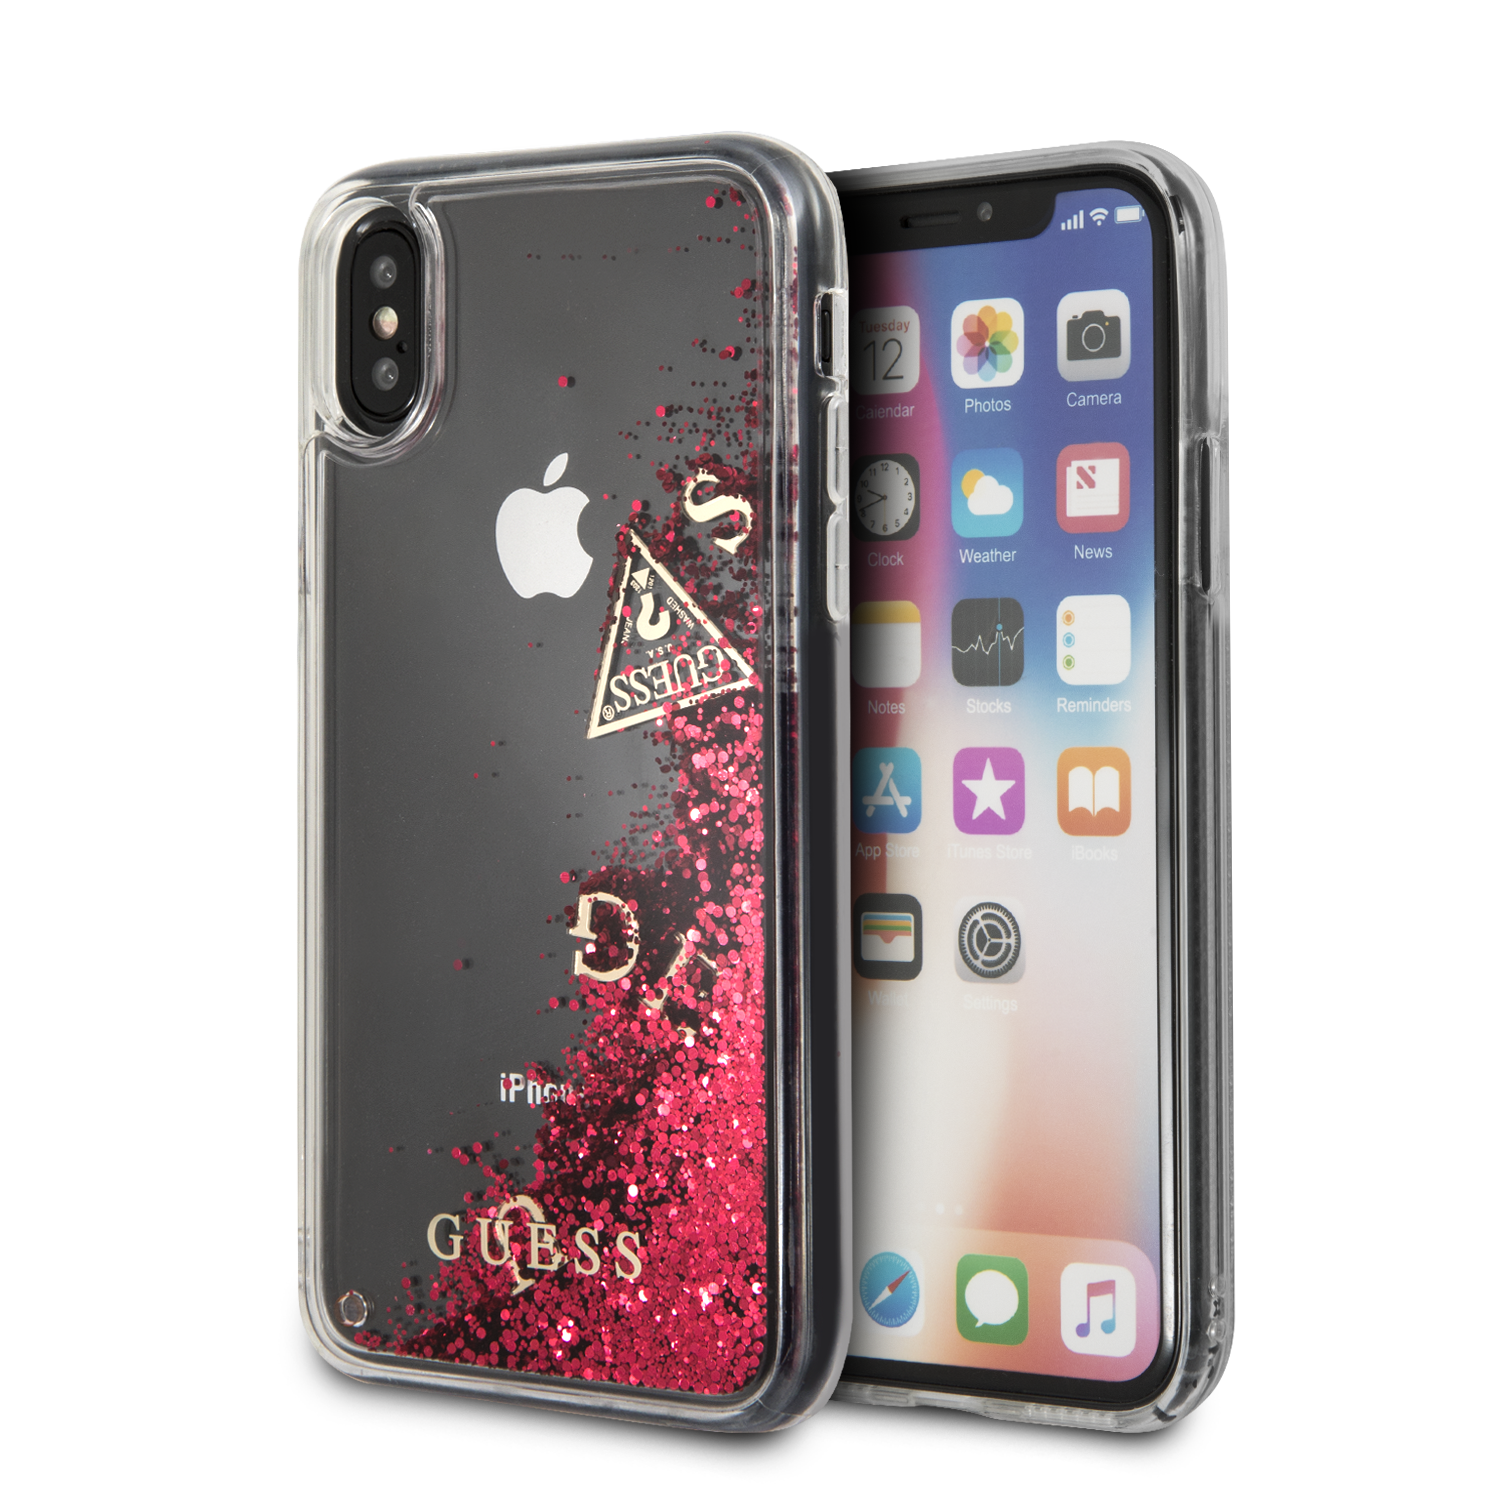 Forro/ Guess Brillos líquidos iPhone X – Forwardcolombia